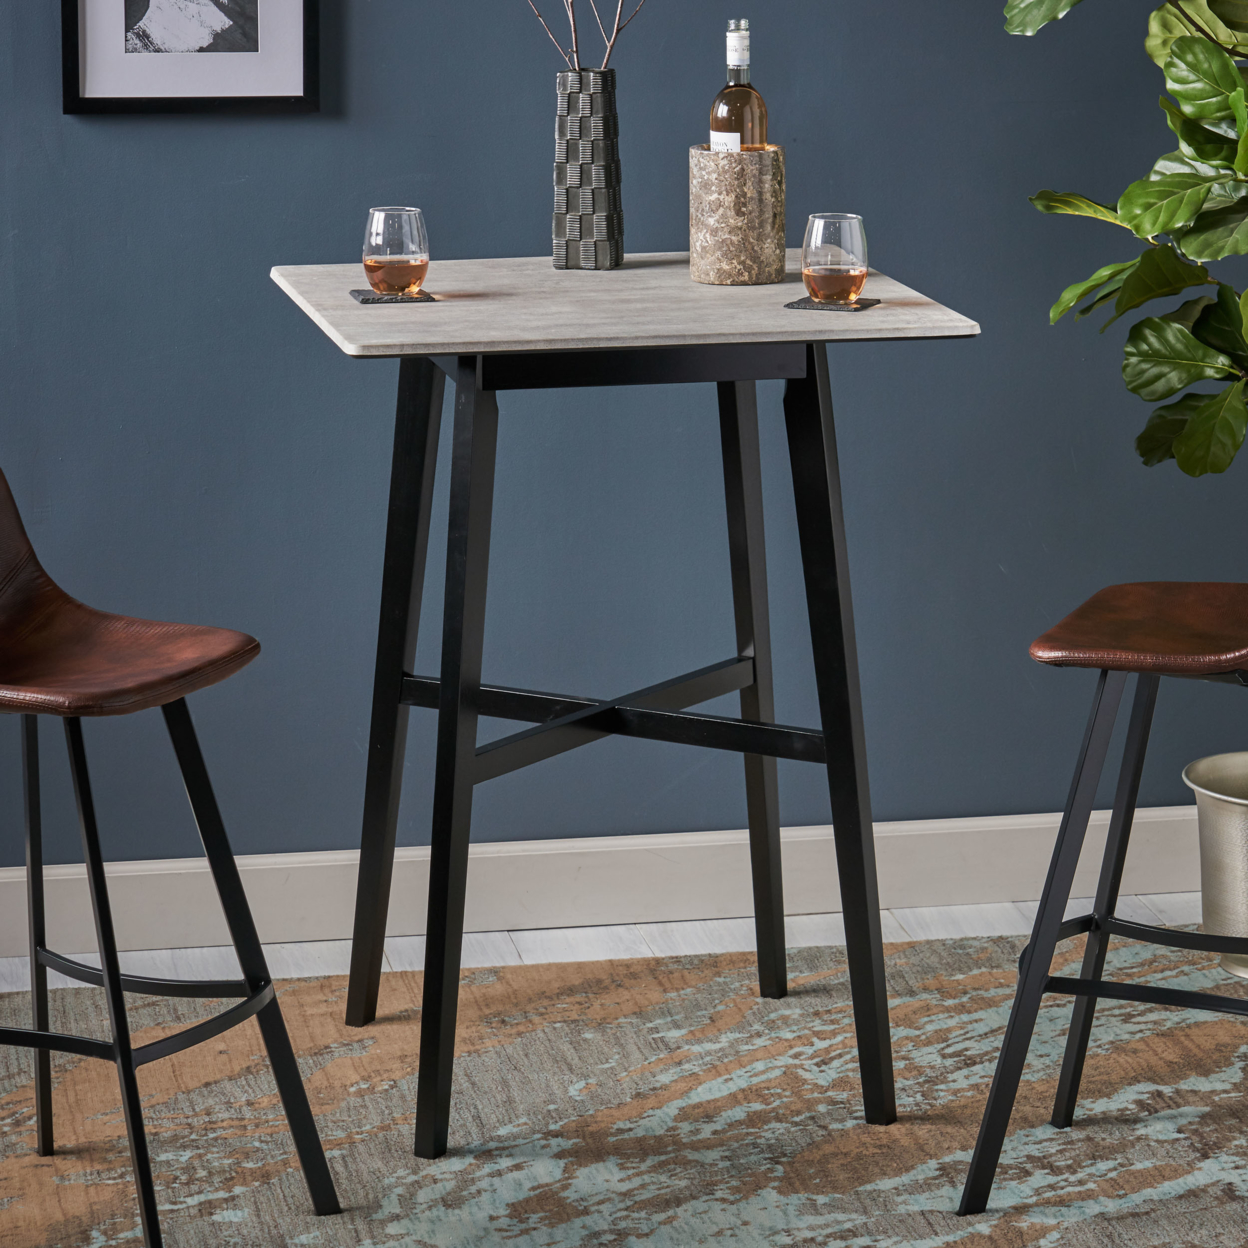 Lily Modern Bar Table With Rubberwood Legs And Laminate Table Top - Gray Finish + Black